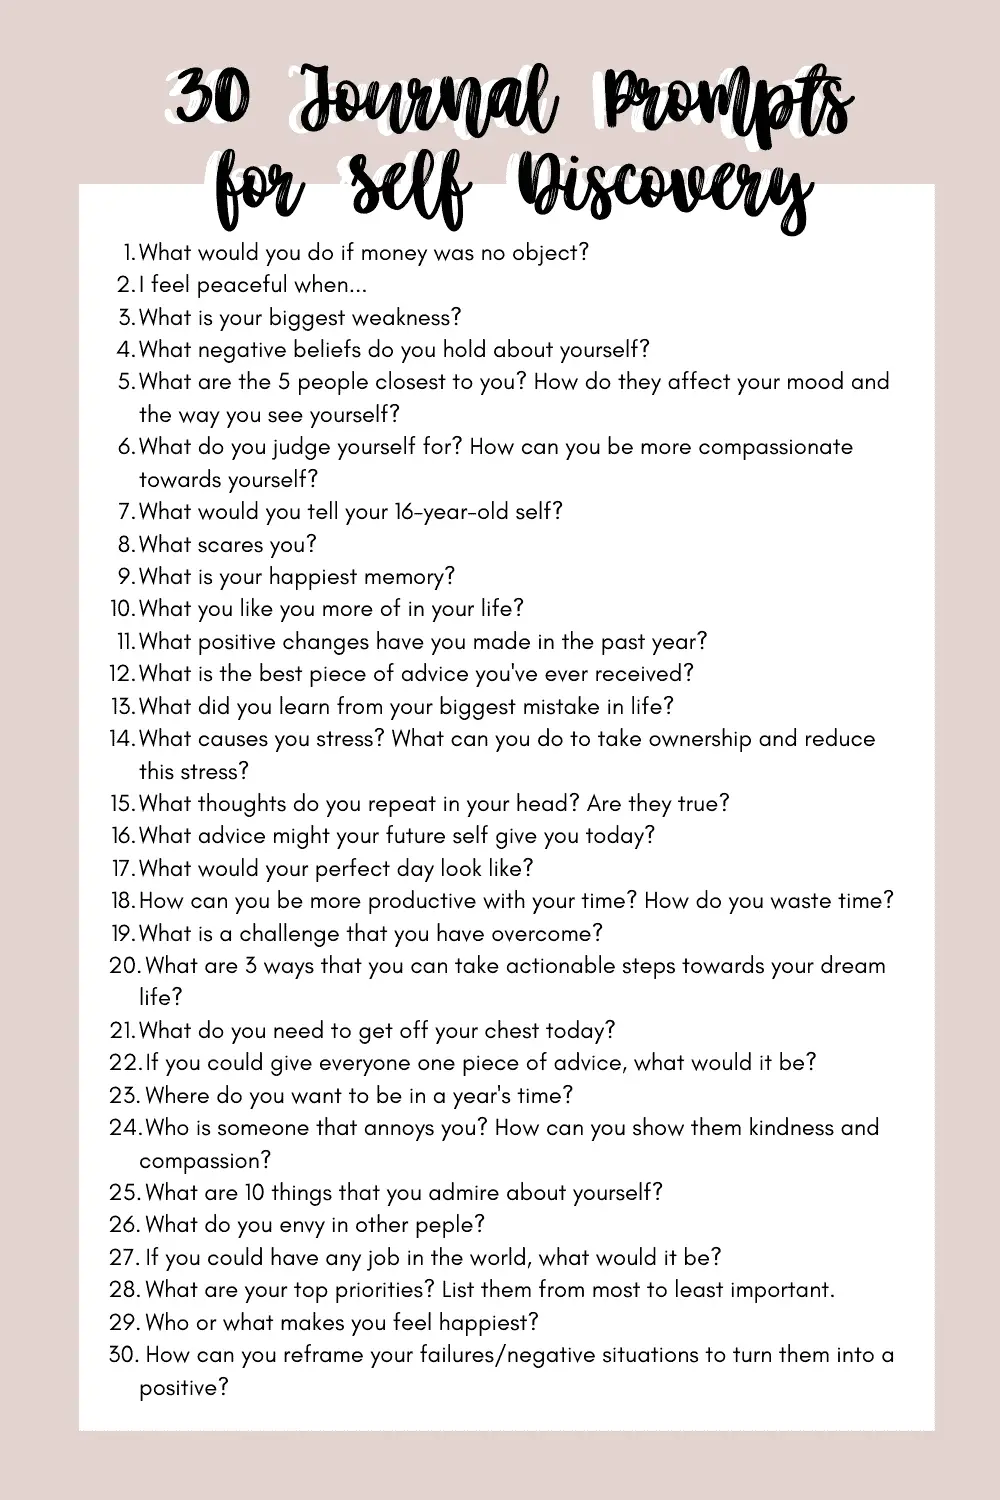 30 Journal Prompts for Self-Discovery - Emma Kate Hall